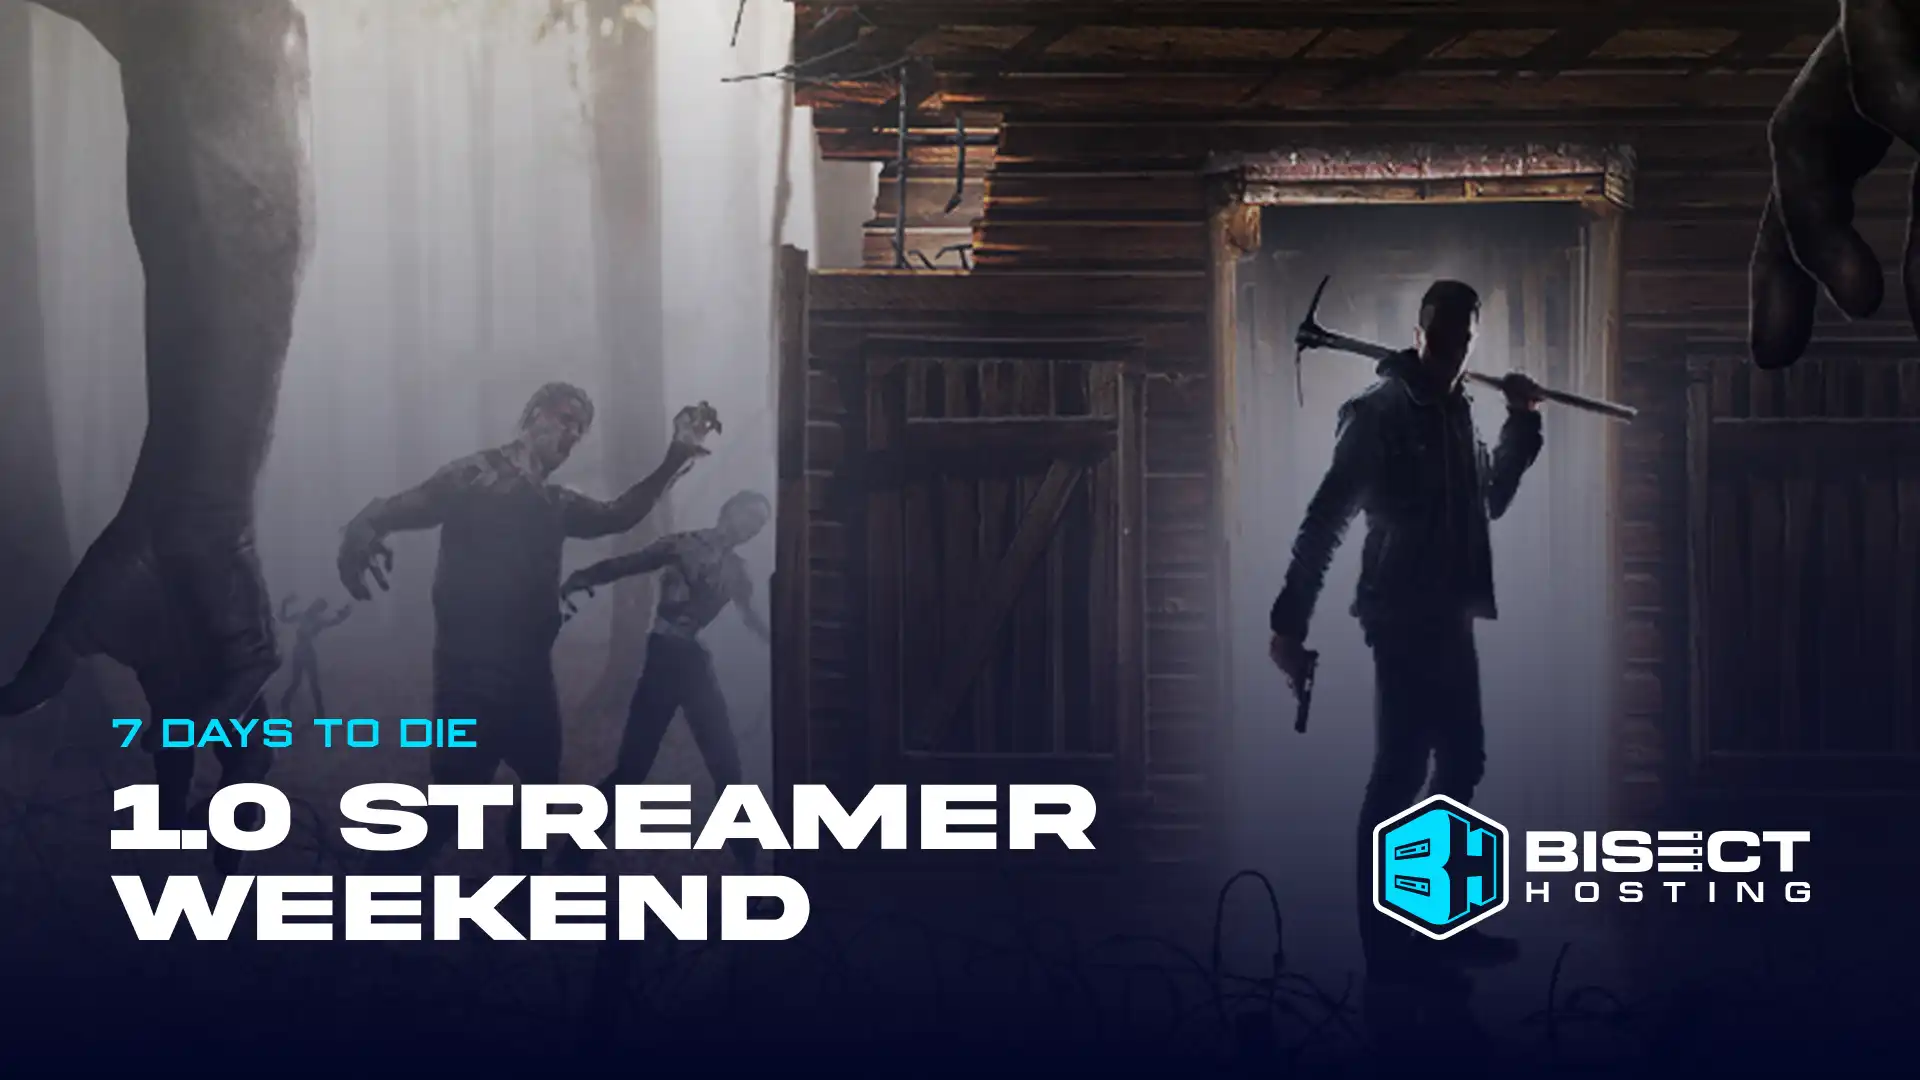 7 Days to Die 1.0 Streamer Weekend: How to Apply, Event Date, & More